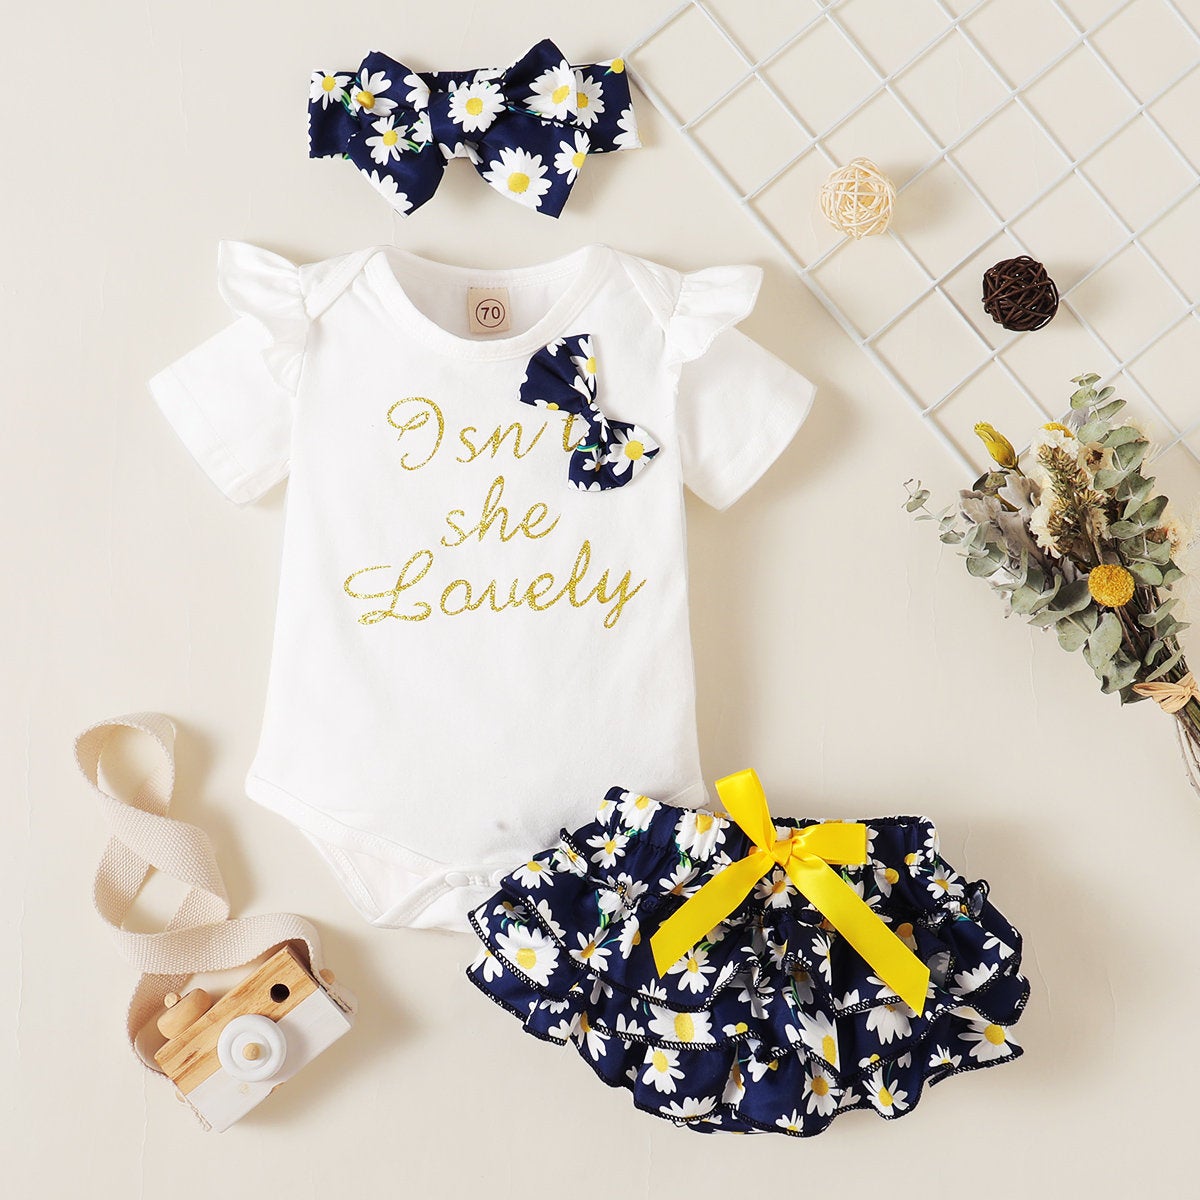 Isn't She Lovely Baby Girl Clothes Set